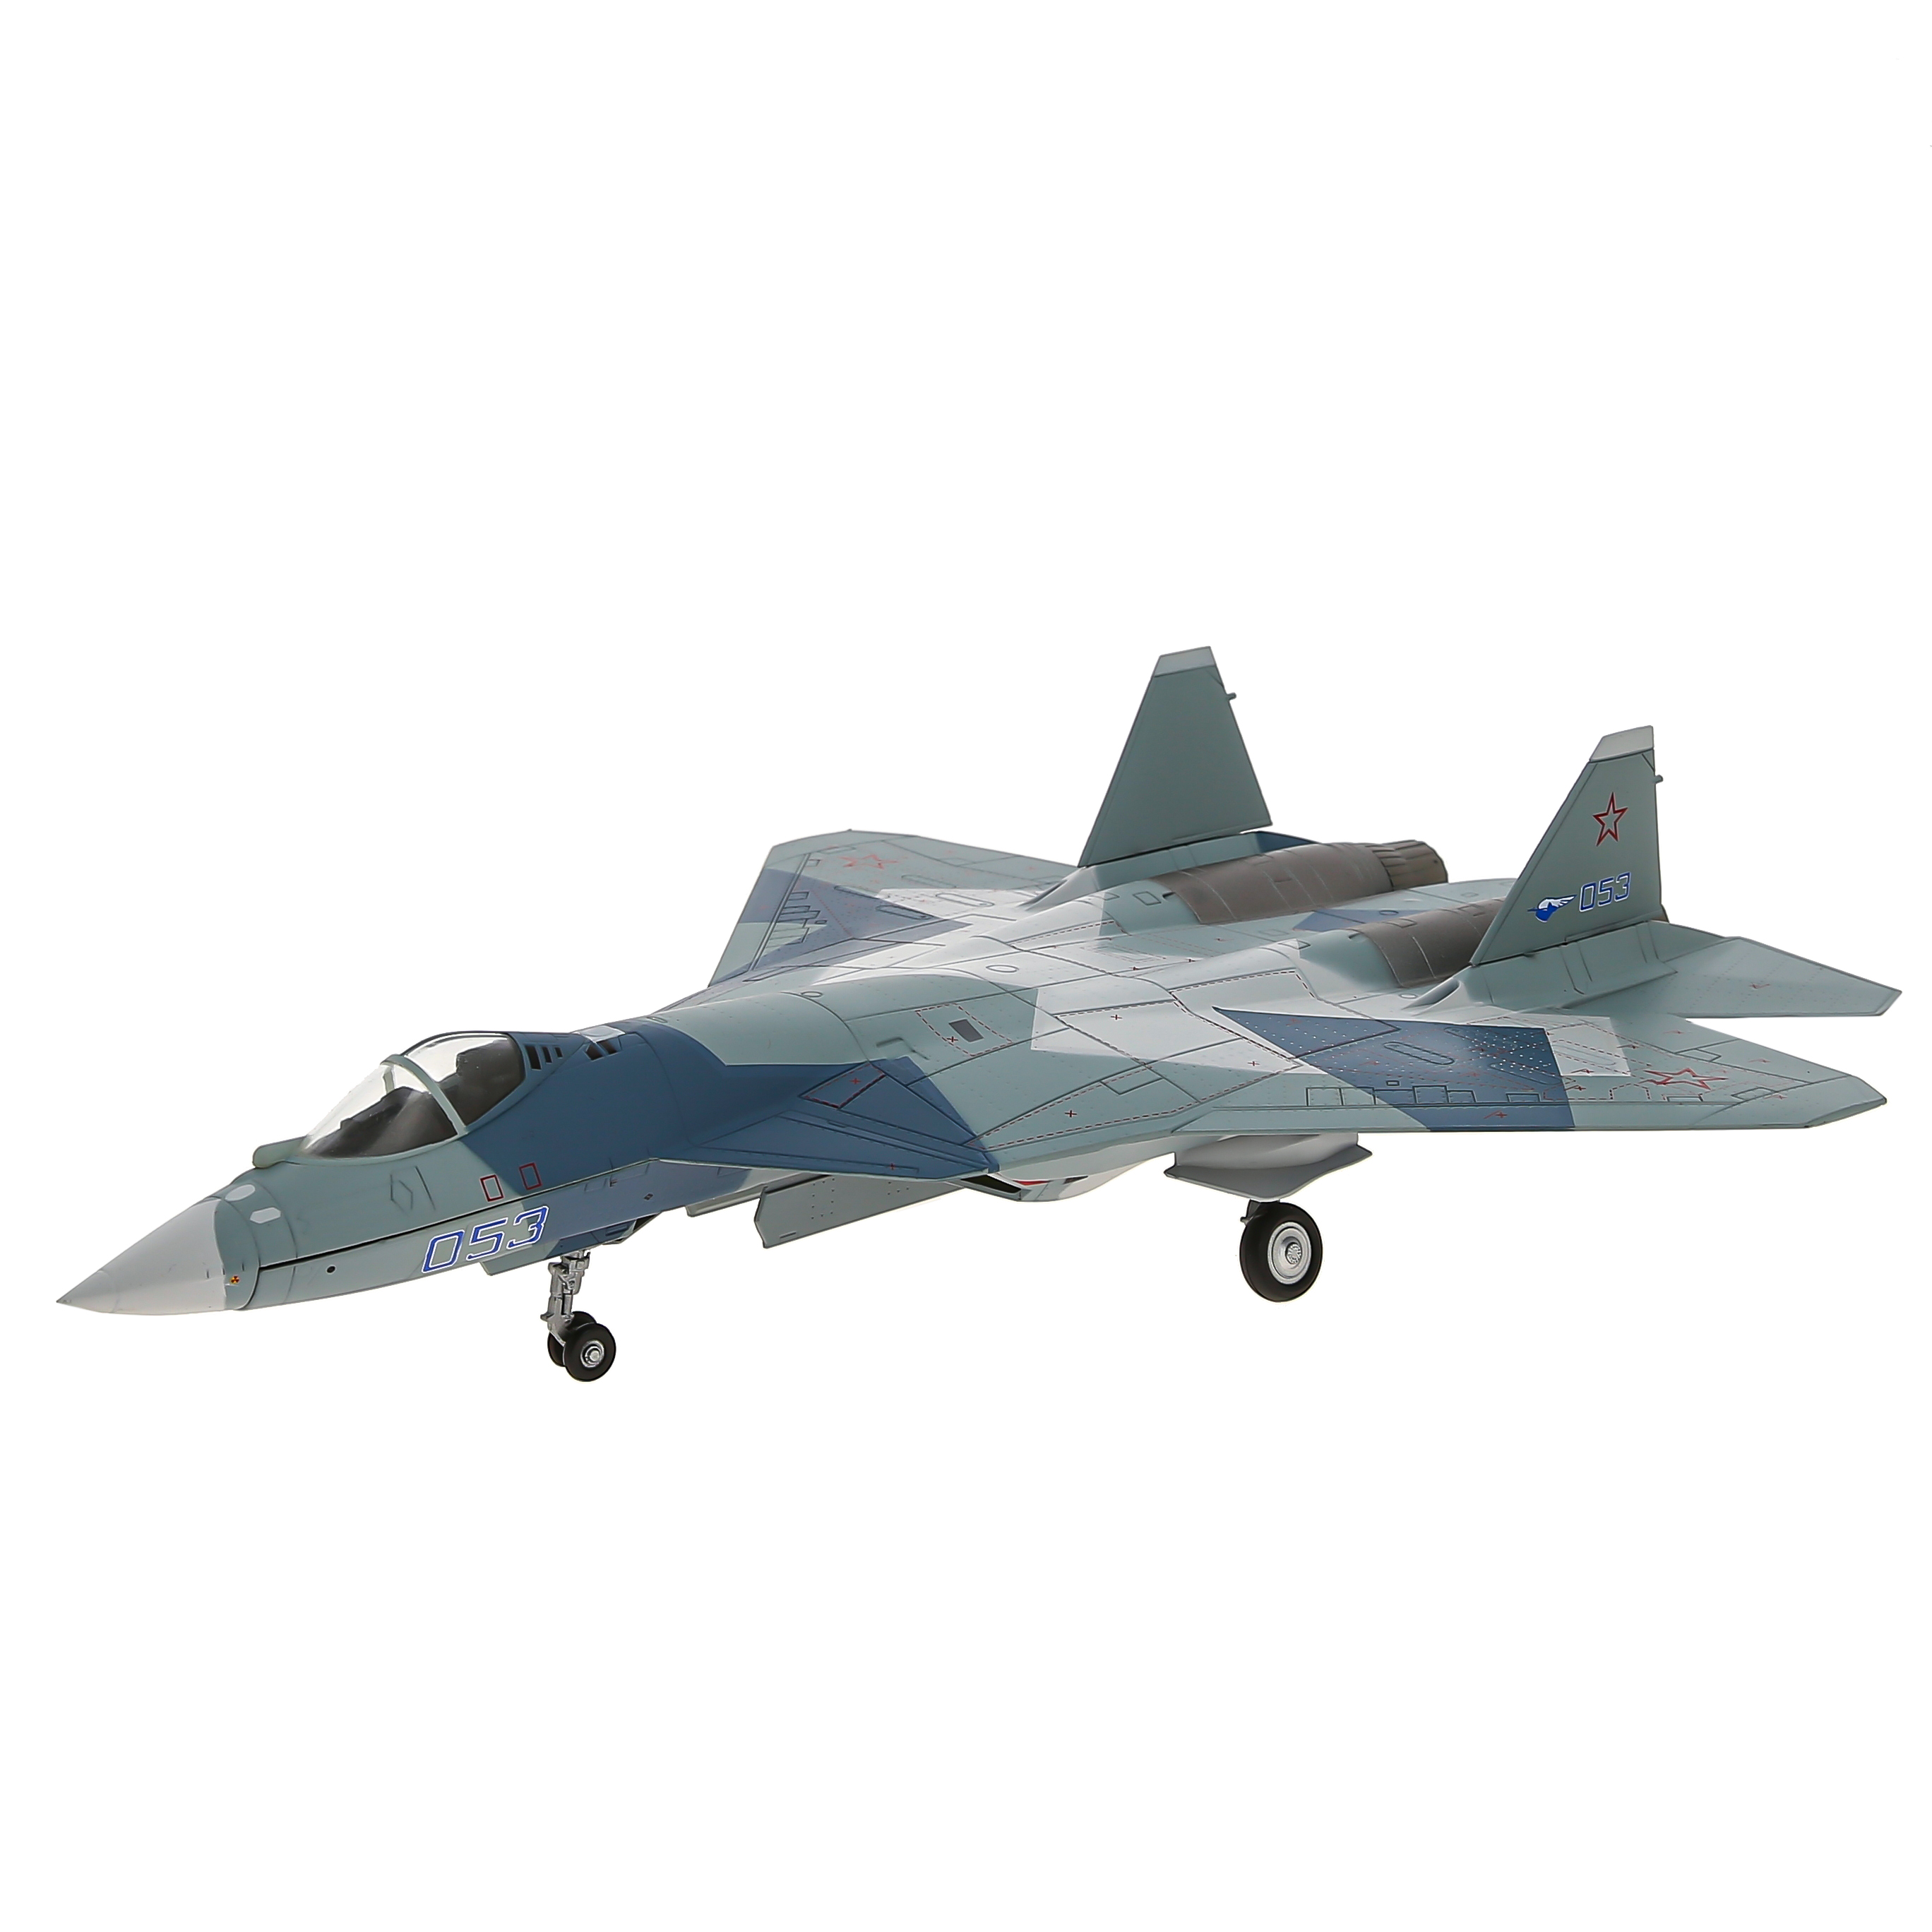       -57 (-50), ,  1:72.  28 . Model of the fifth-generation fighter aircraft of Russia Su-57 (T-50), metal, scale 1:72. Length 28 cm. # 2 hobbyplus.ru